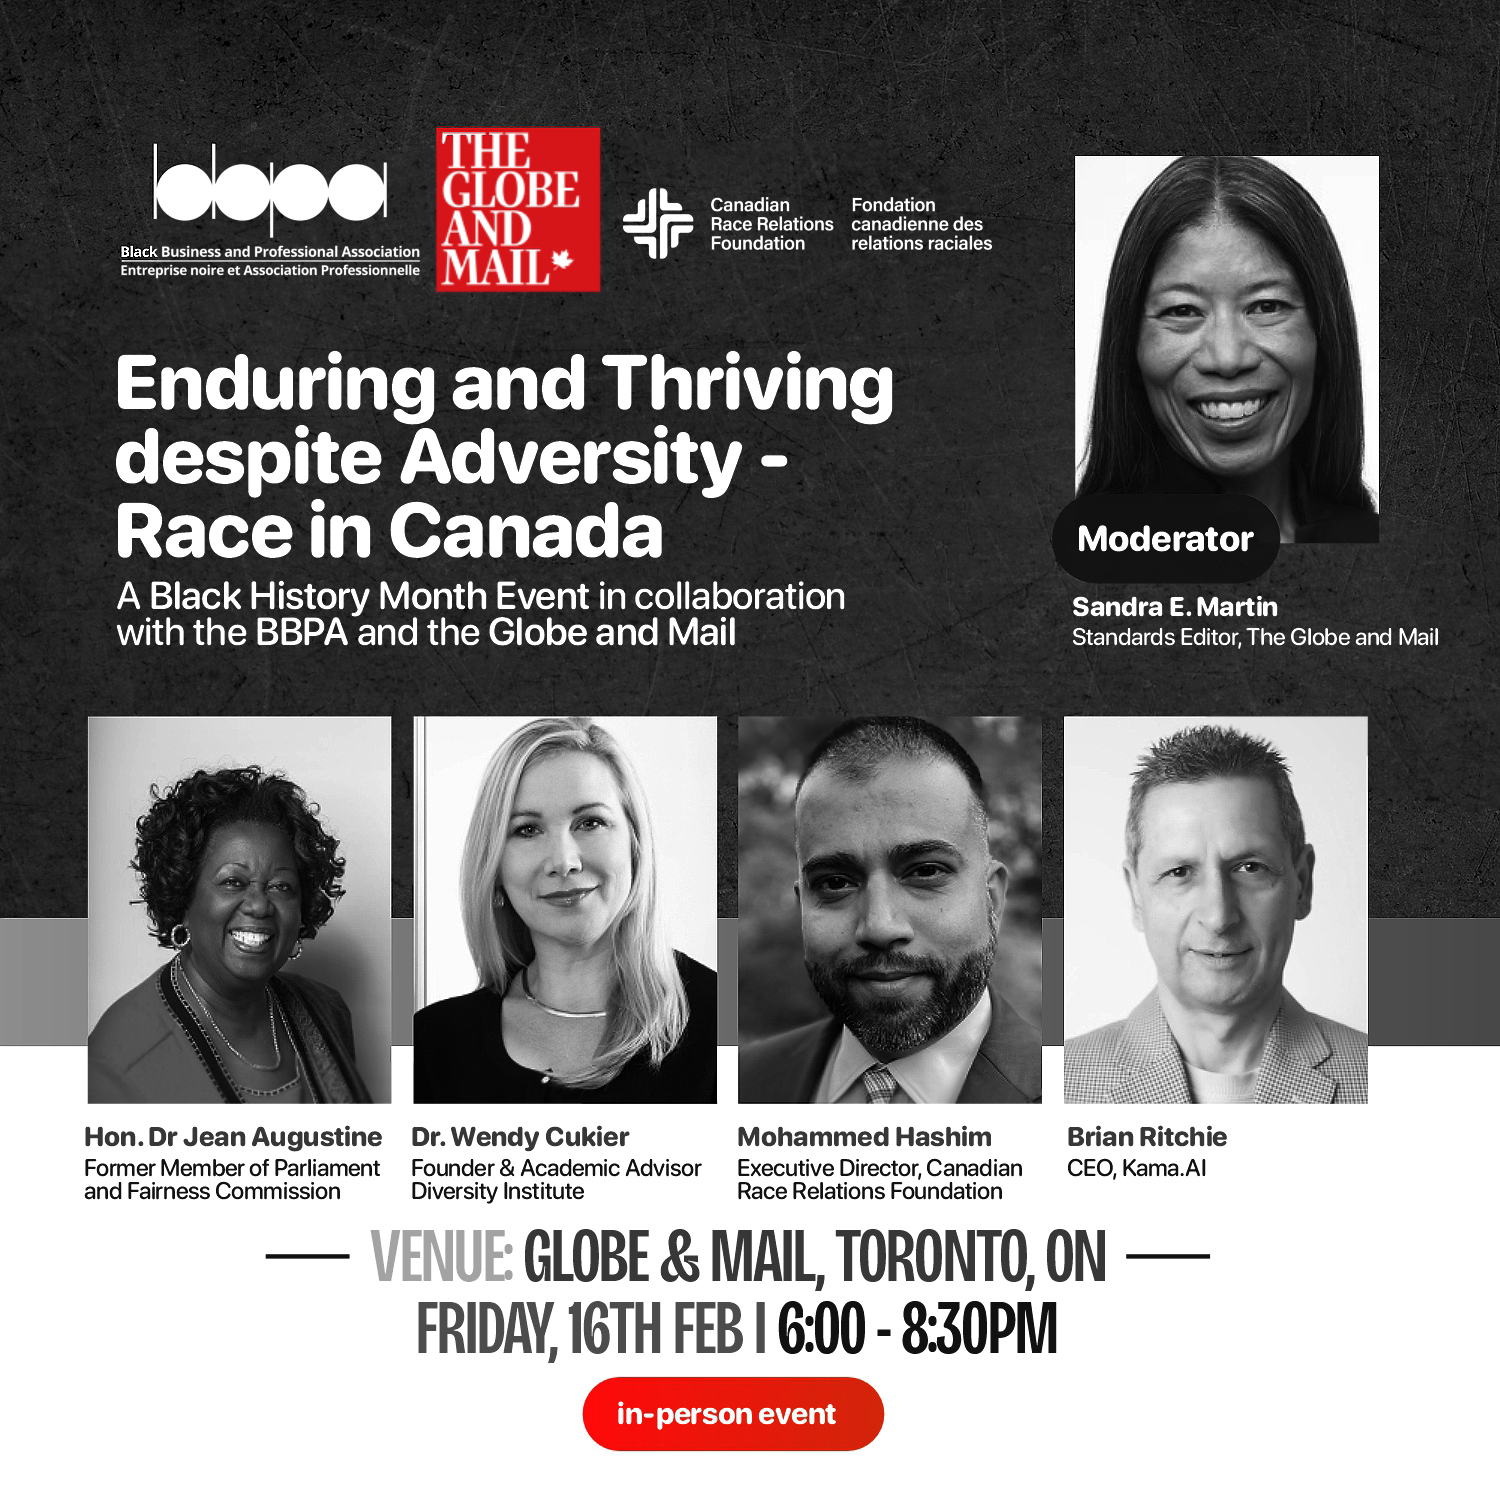 Globe and Mail Black History Month Event – kama.ai CEO Brian Ritchie Joins Panel